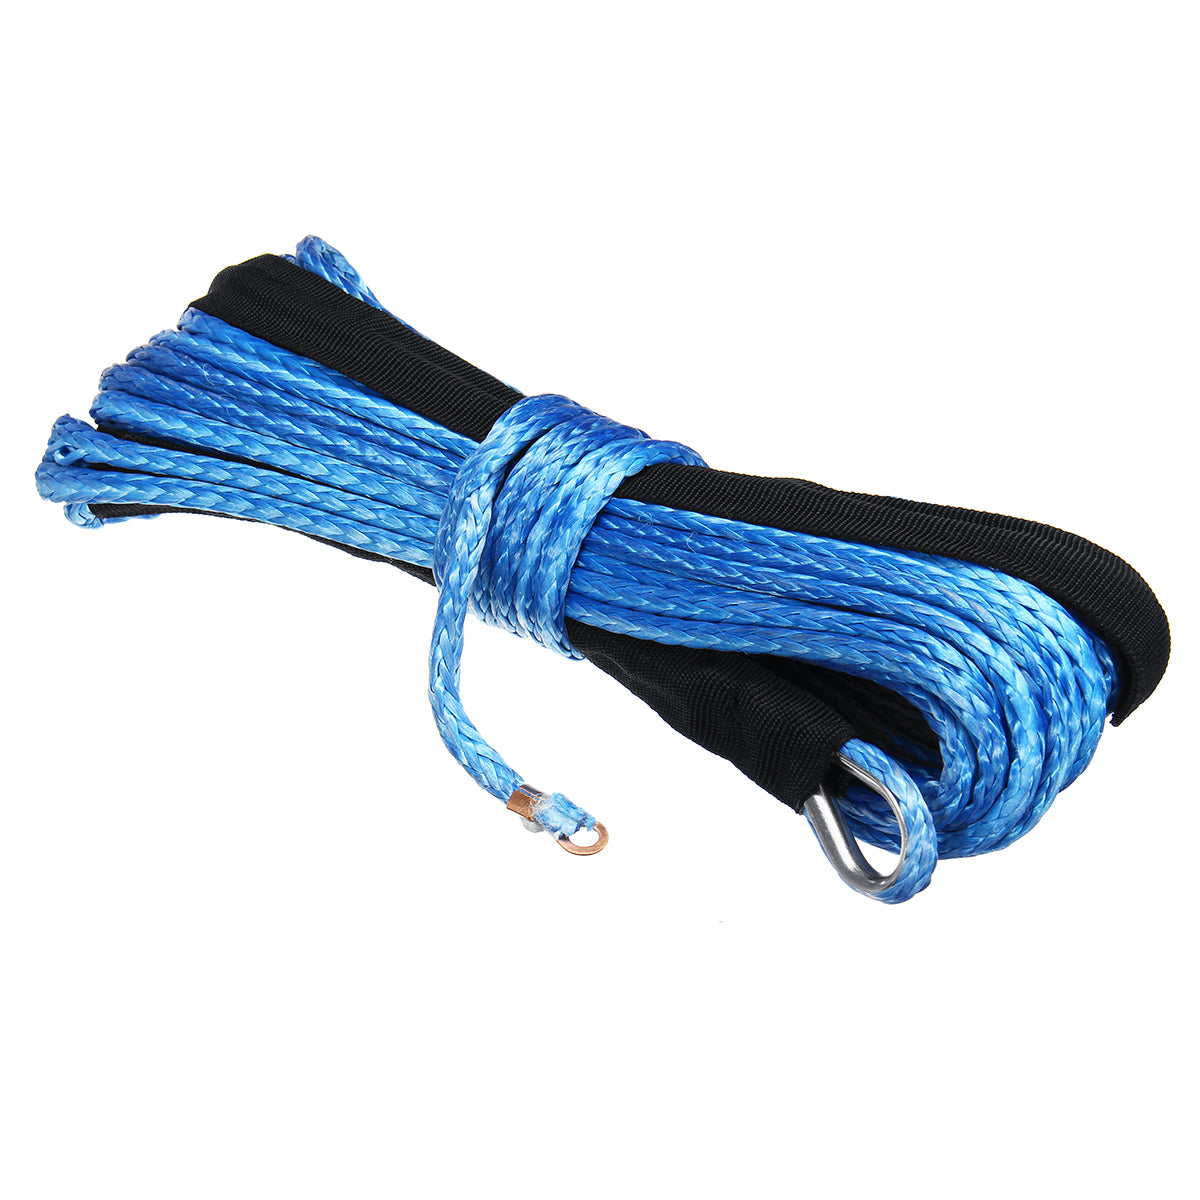 Dark Slate Blue 15m 5500LBs Winch Rope String Line Cable With Sheath Synthetic Towing Rope Car Wash Maintenance String For ATV UTV Off-Road Motorcycle